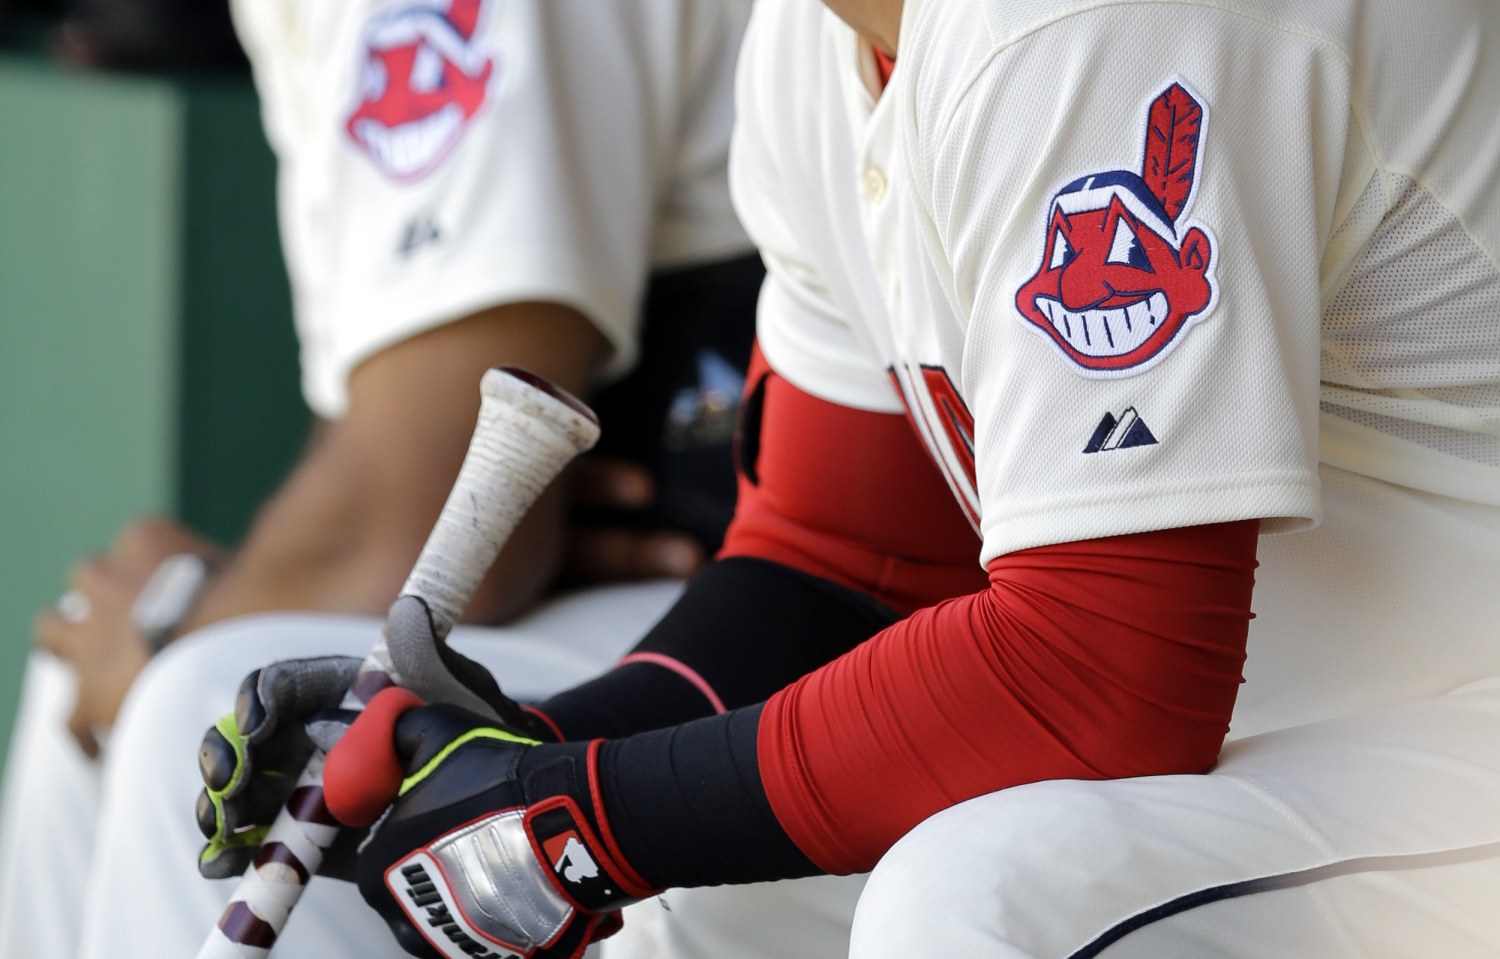 indians jersey with chief wahoo